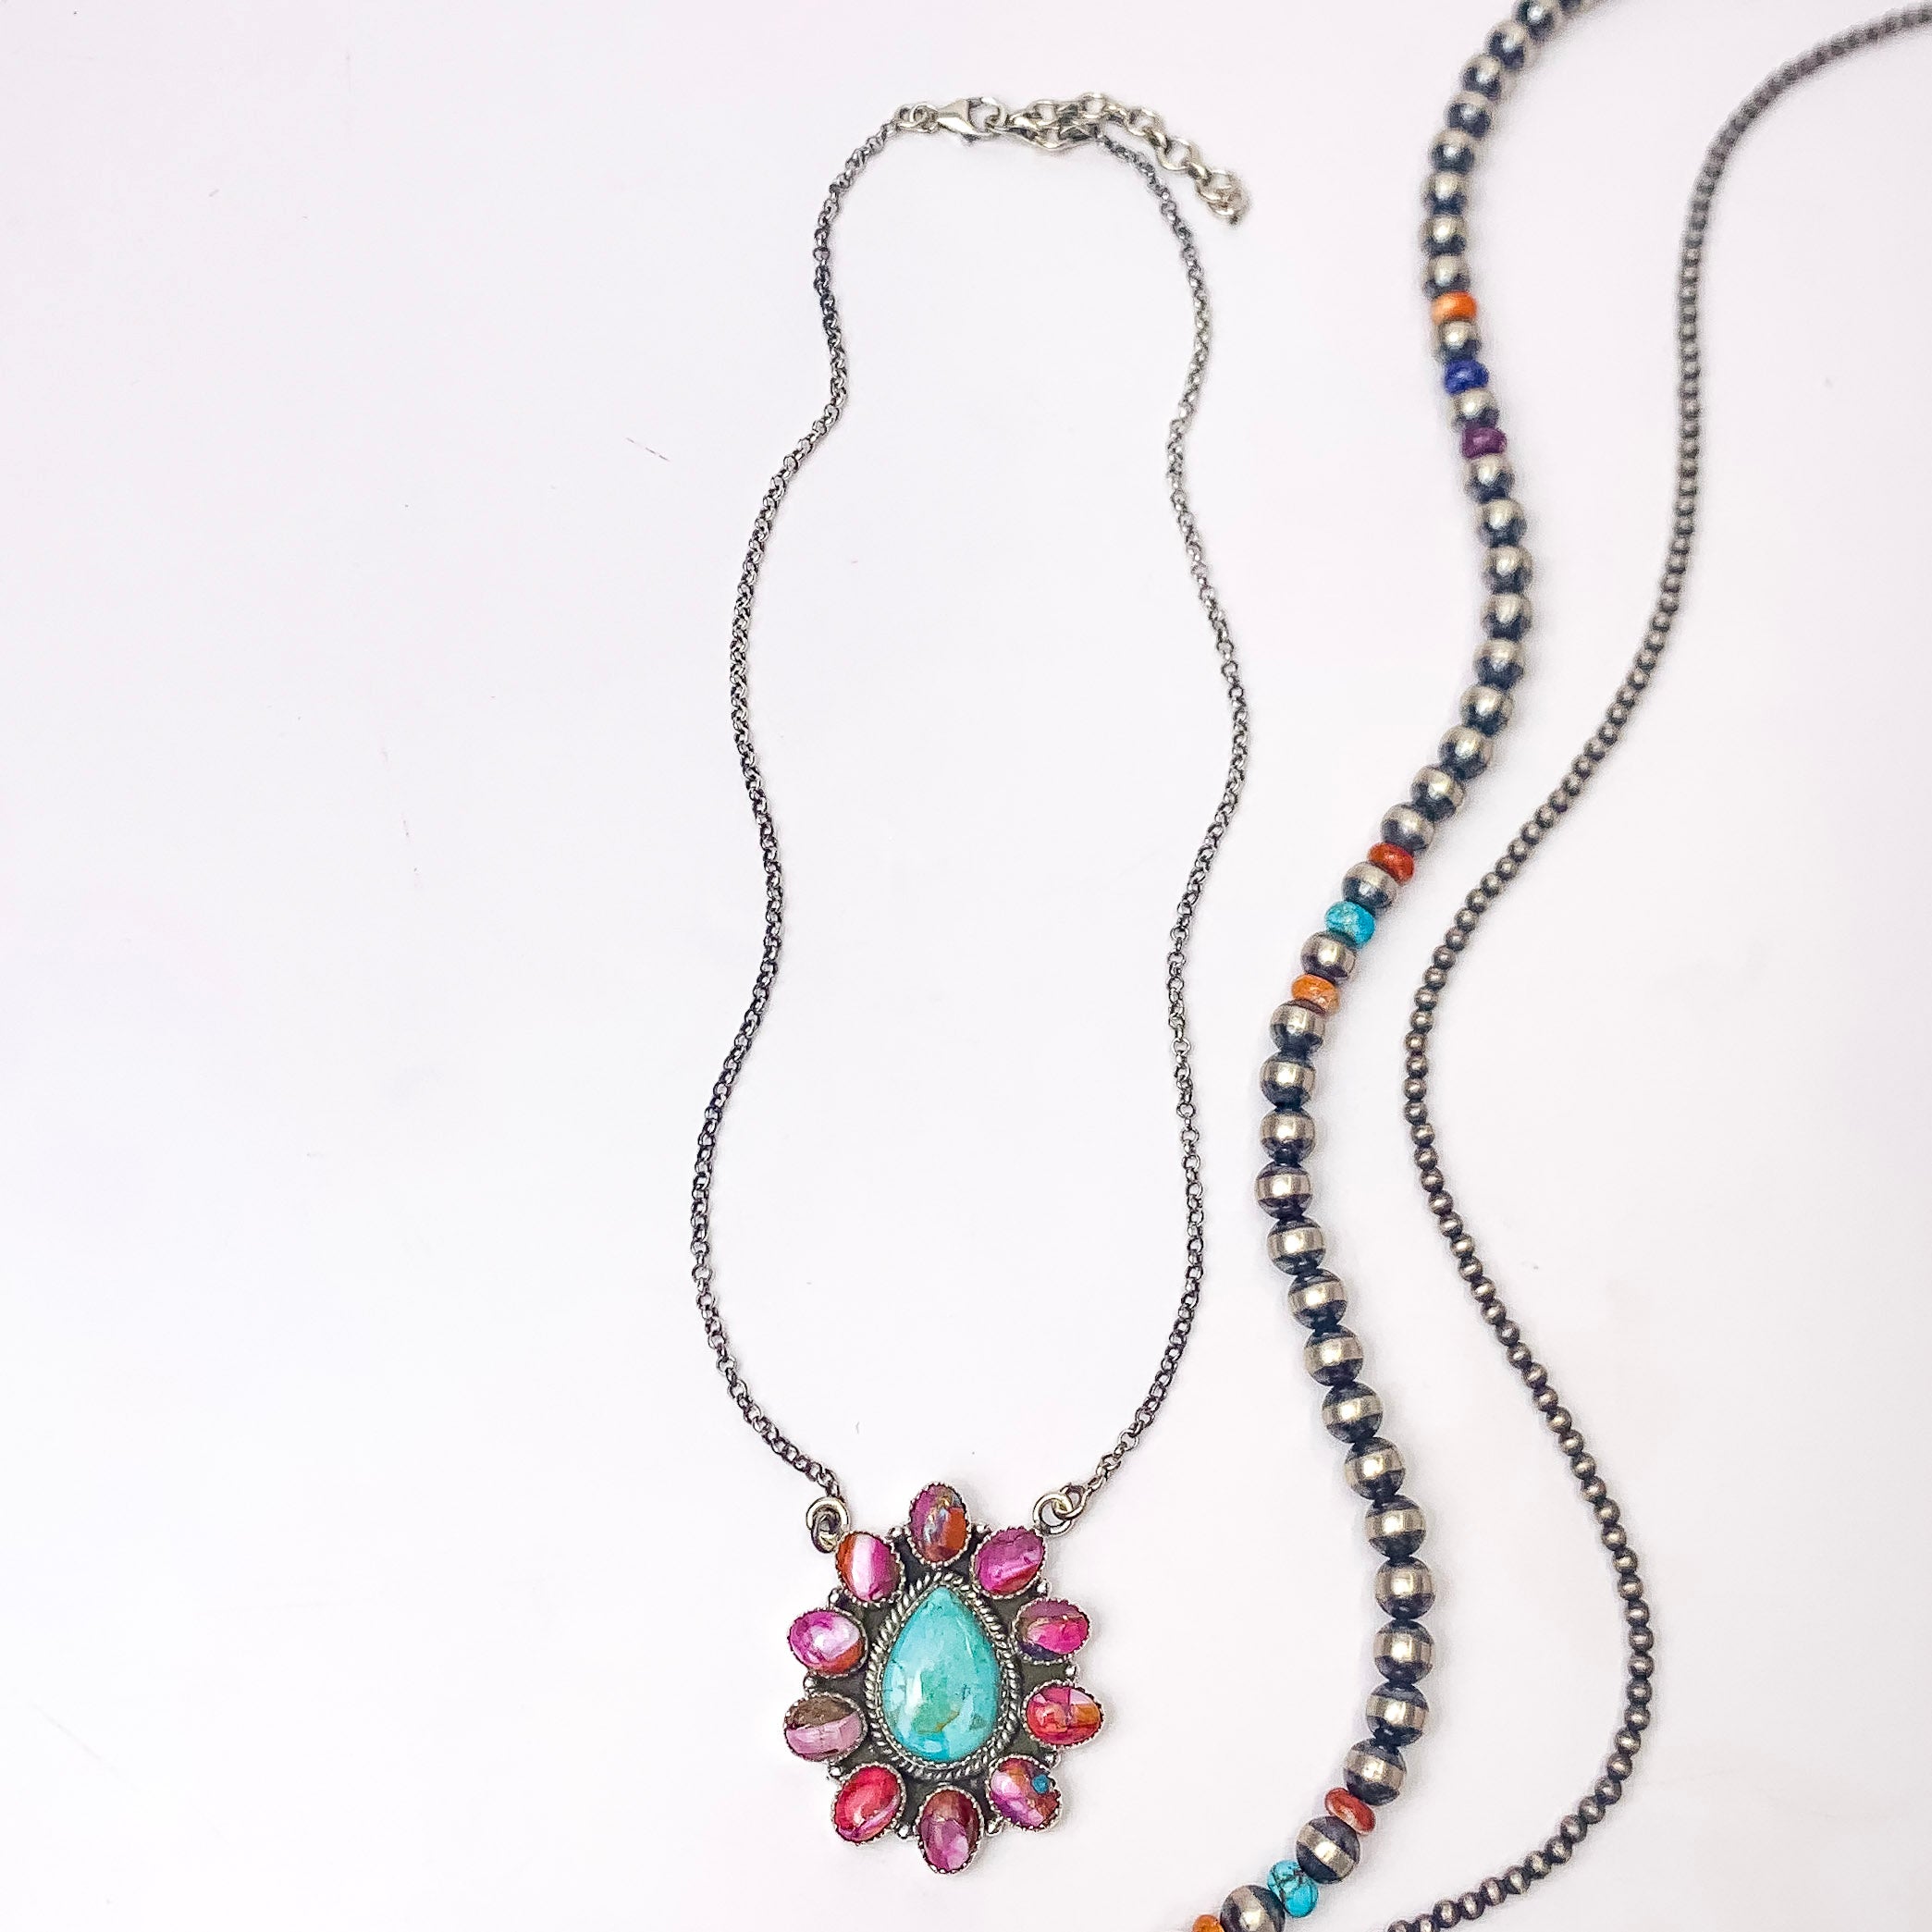 Hada Collection | Handmade Sterling Silver Necklace with Turquoise Teardrop Center and Remix Outline - Giddy Up Glamour Boutique